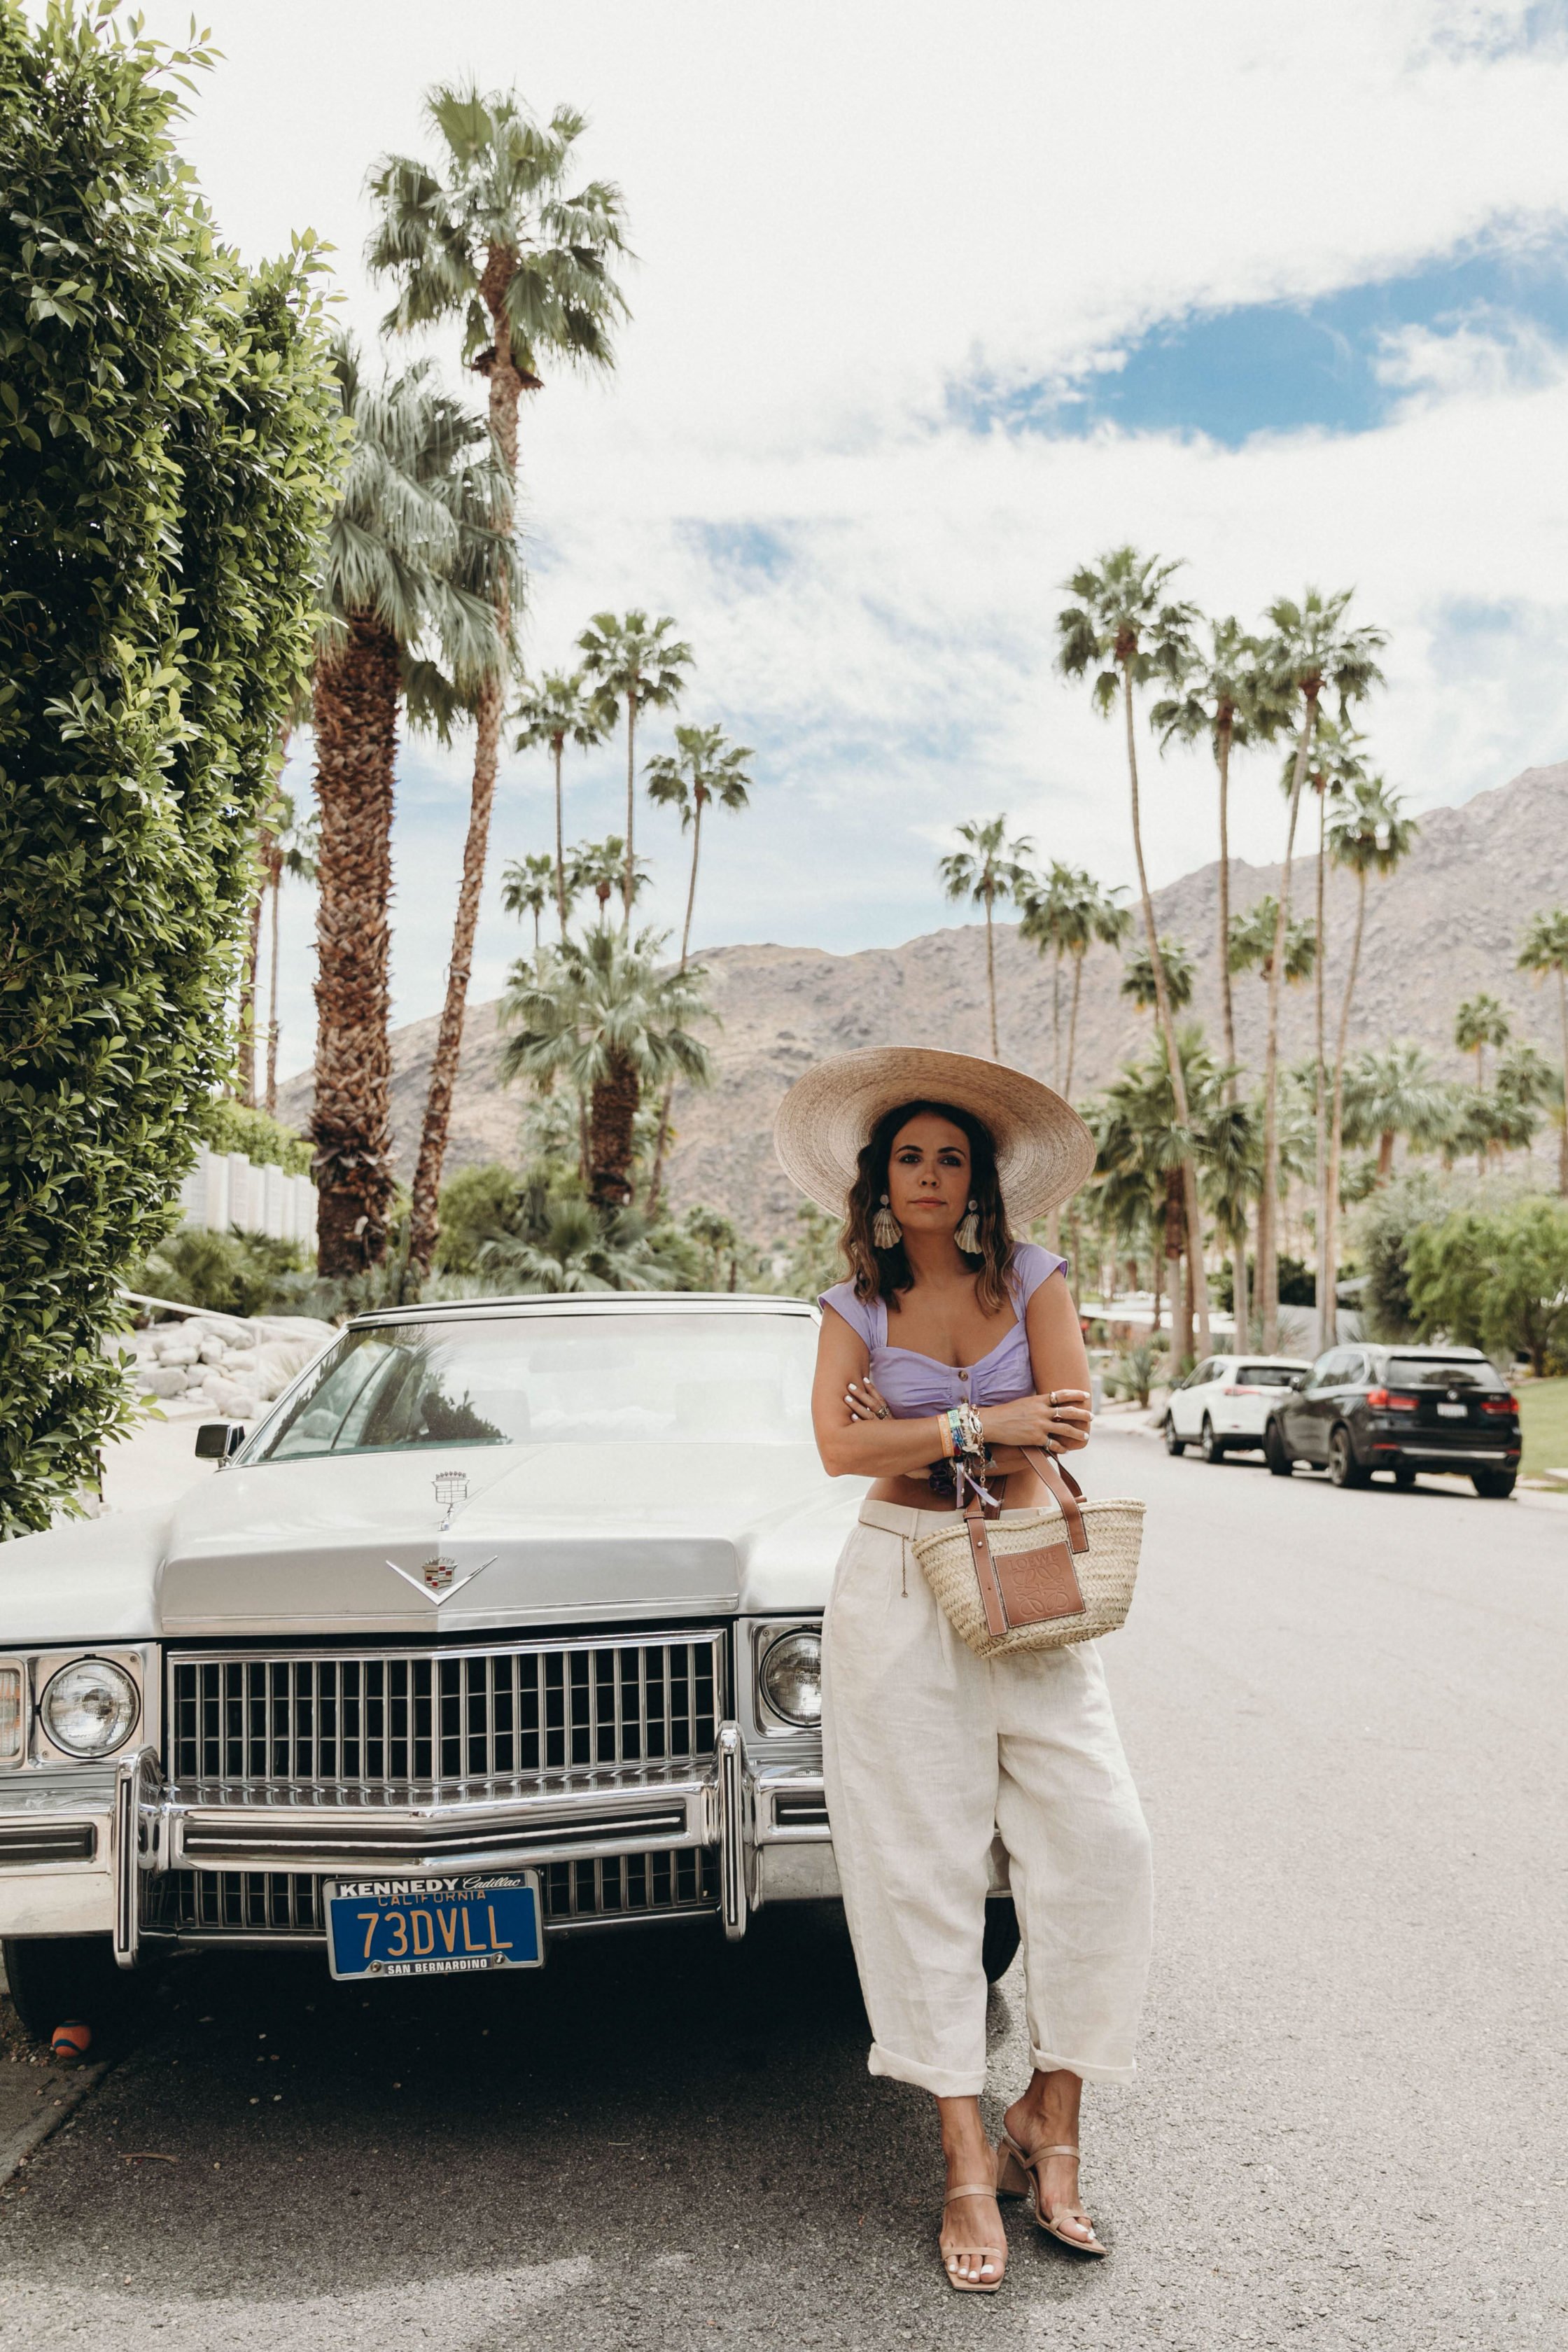 Sara of Collage Vintage wearing a LPA lilac top and baggy pants for attending Coachella 2019